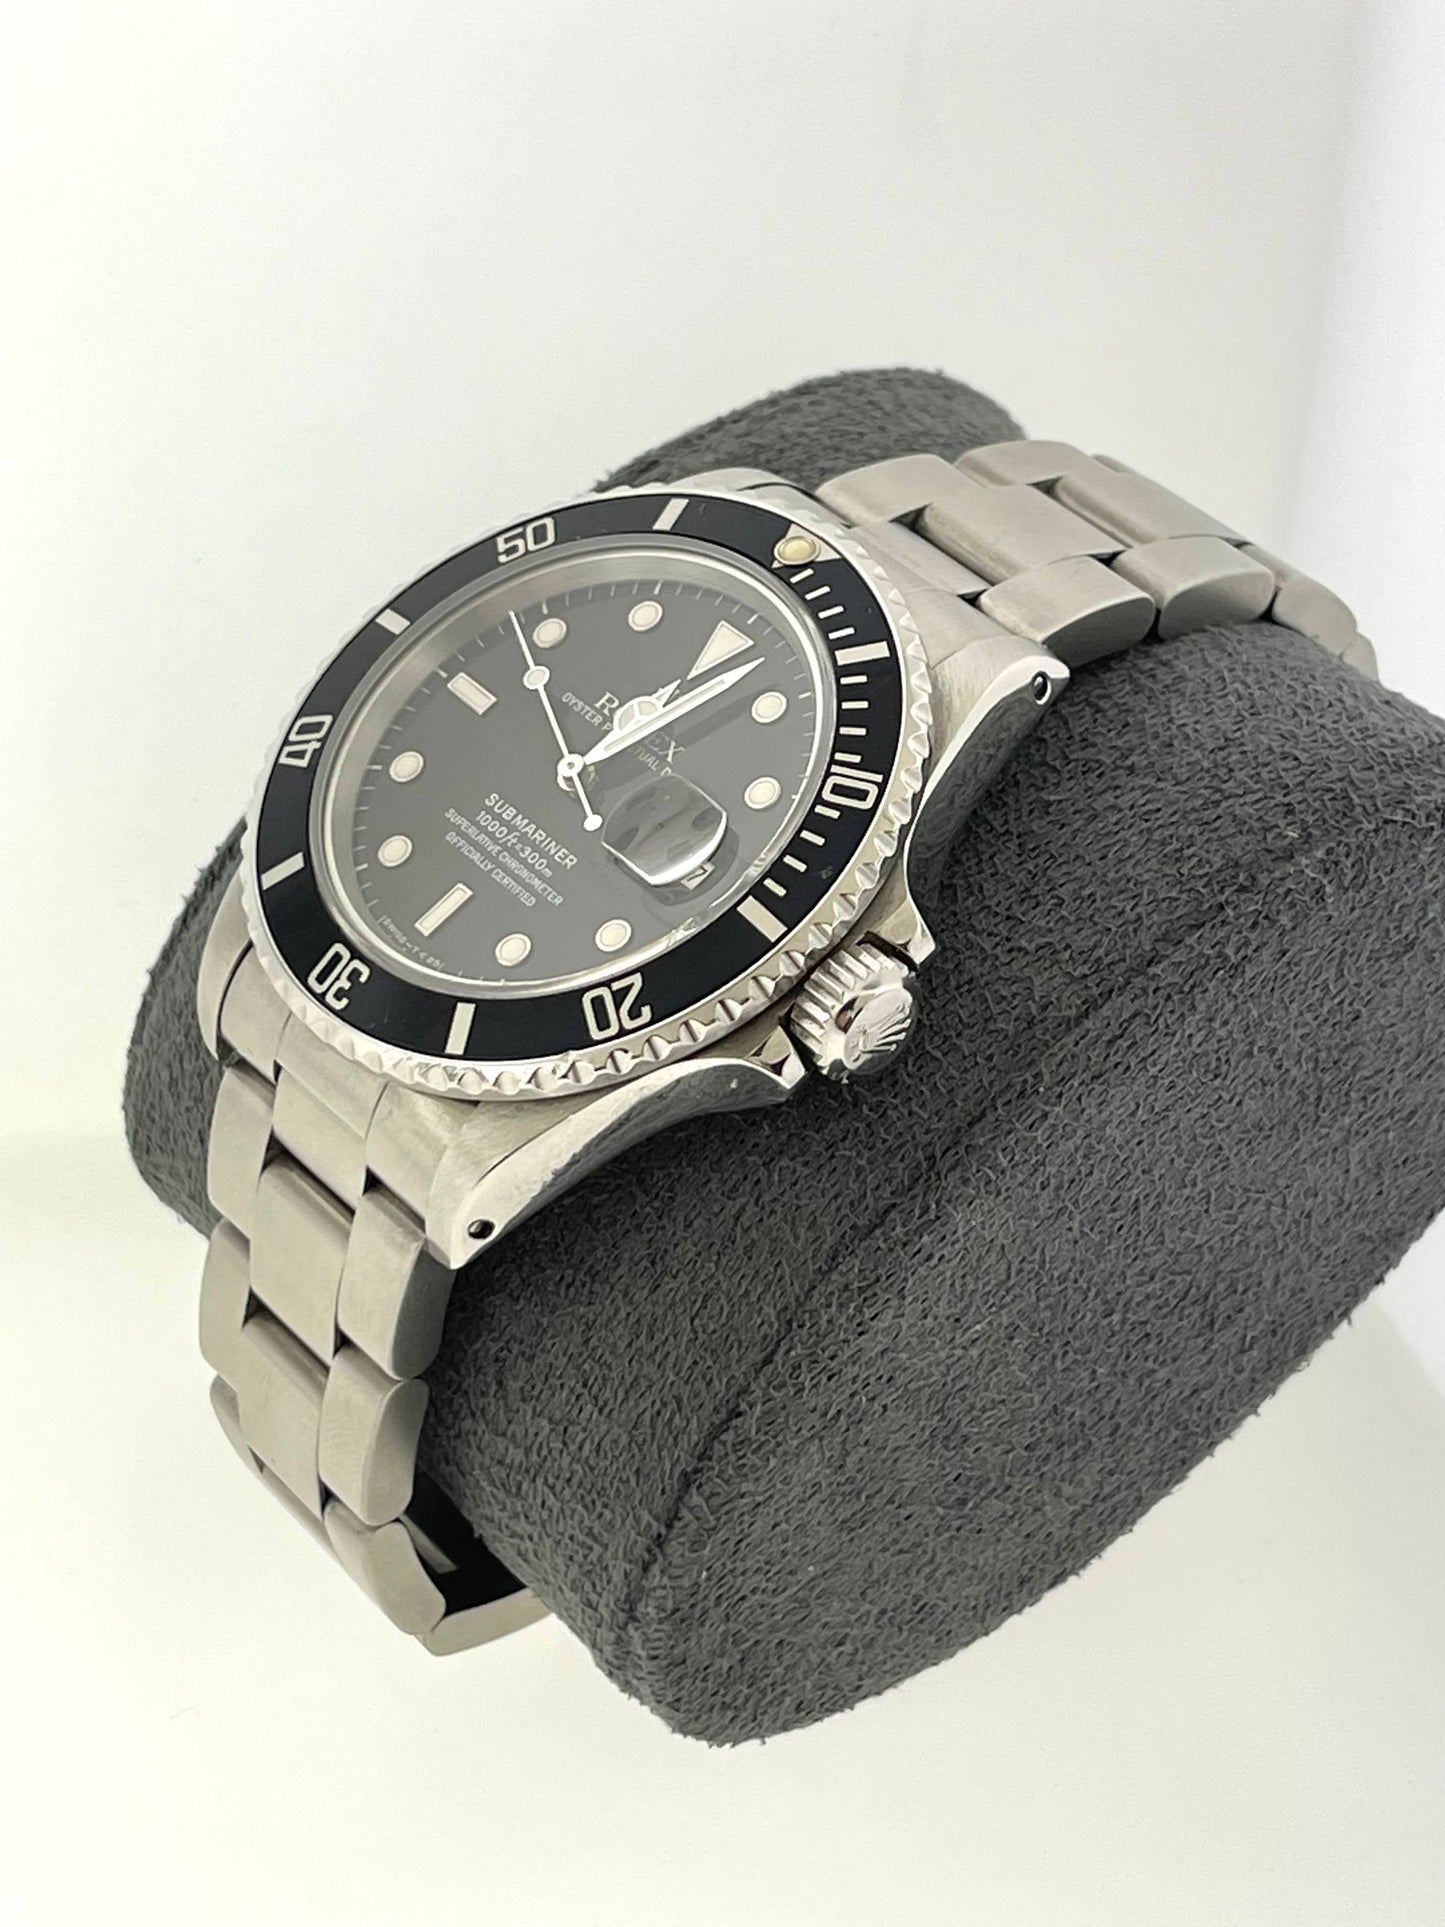 1988 Rolex Transitional Submariner 168000 Black Dial No Papers 40mm